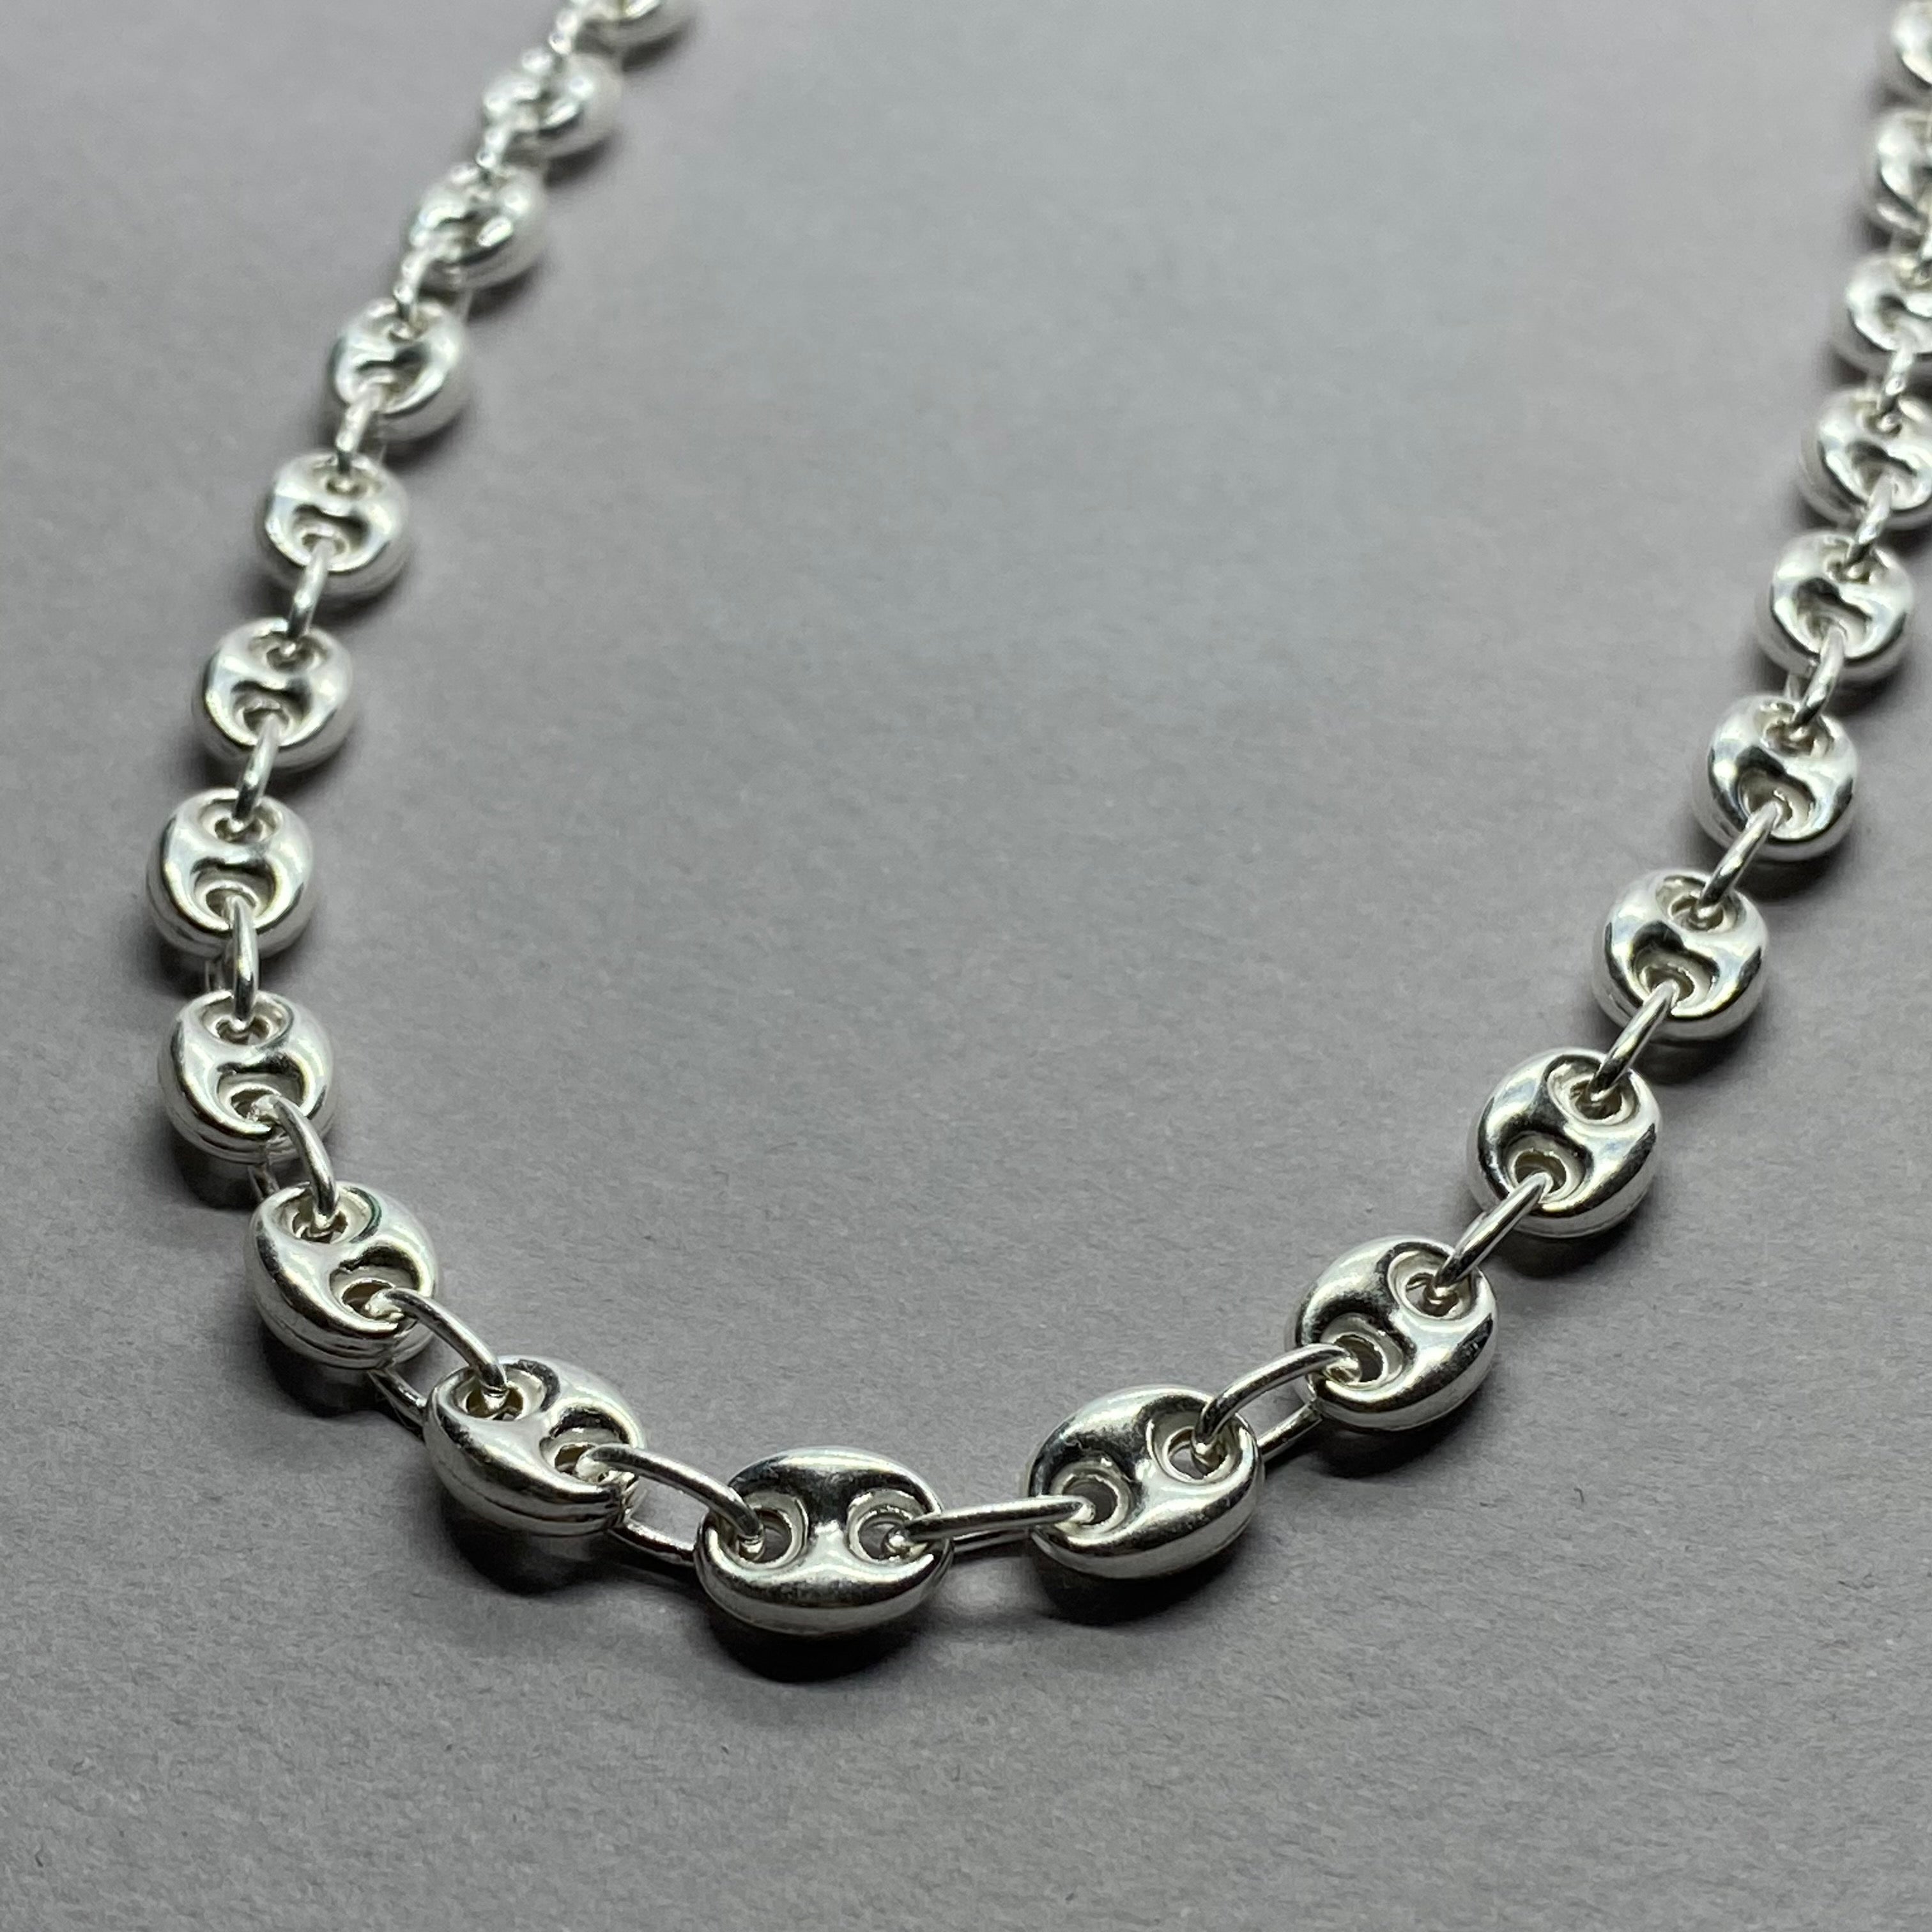 PUFF LINK CHAIN STERLING SILVER